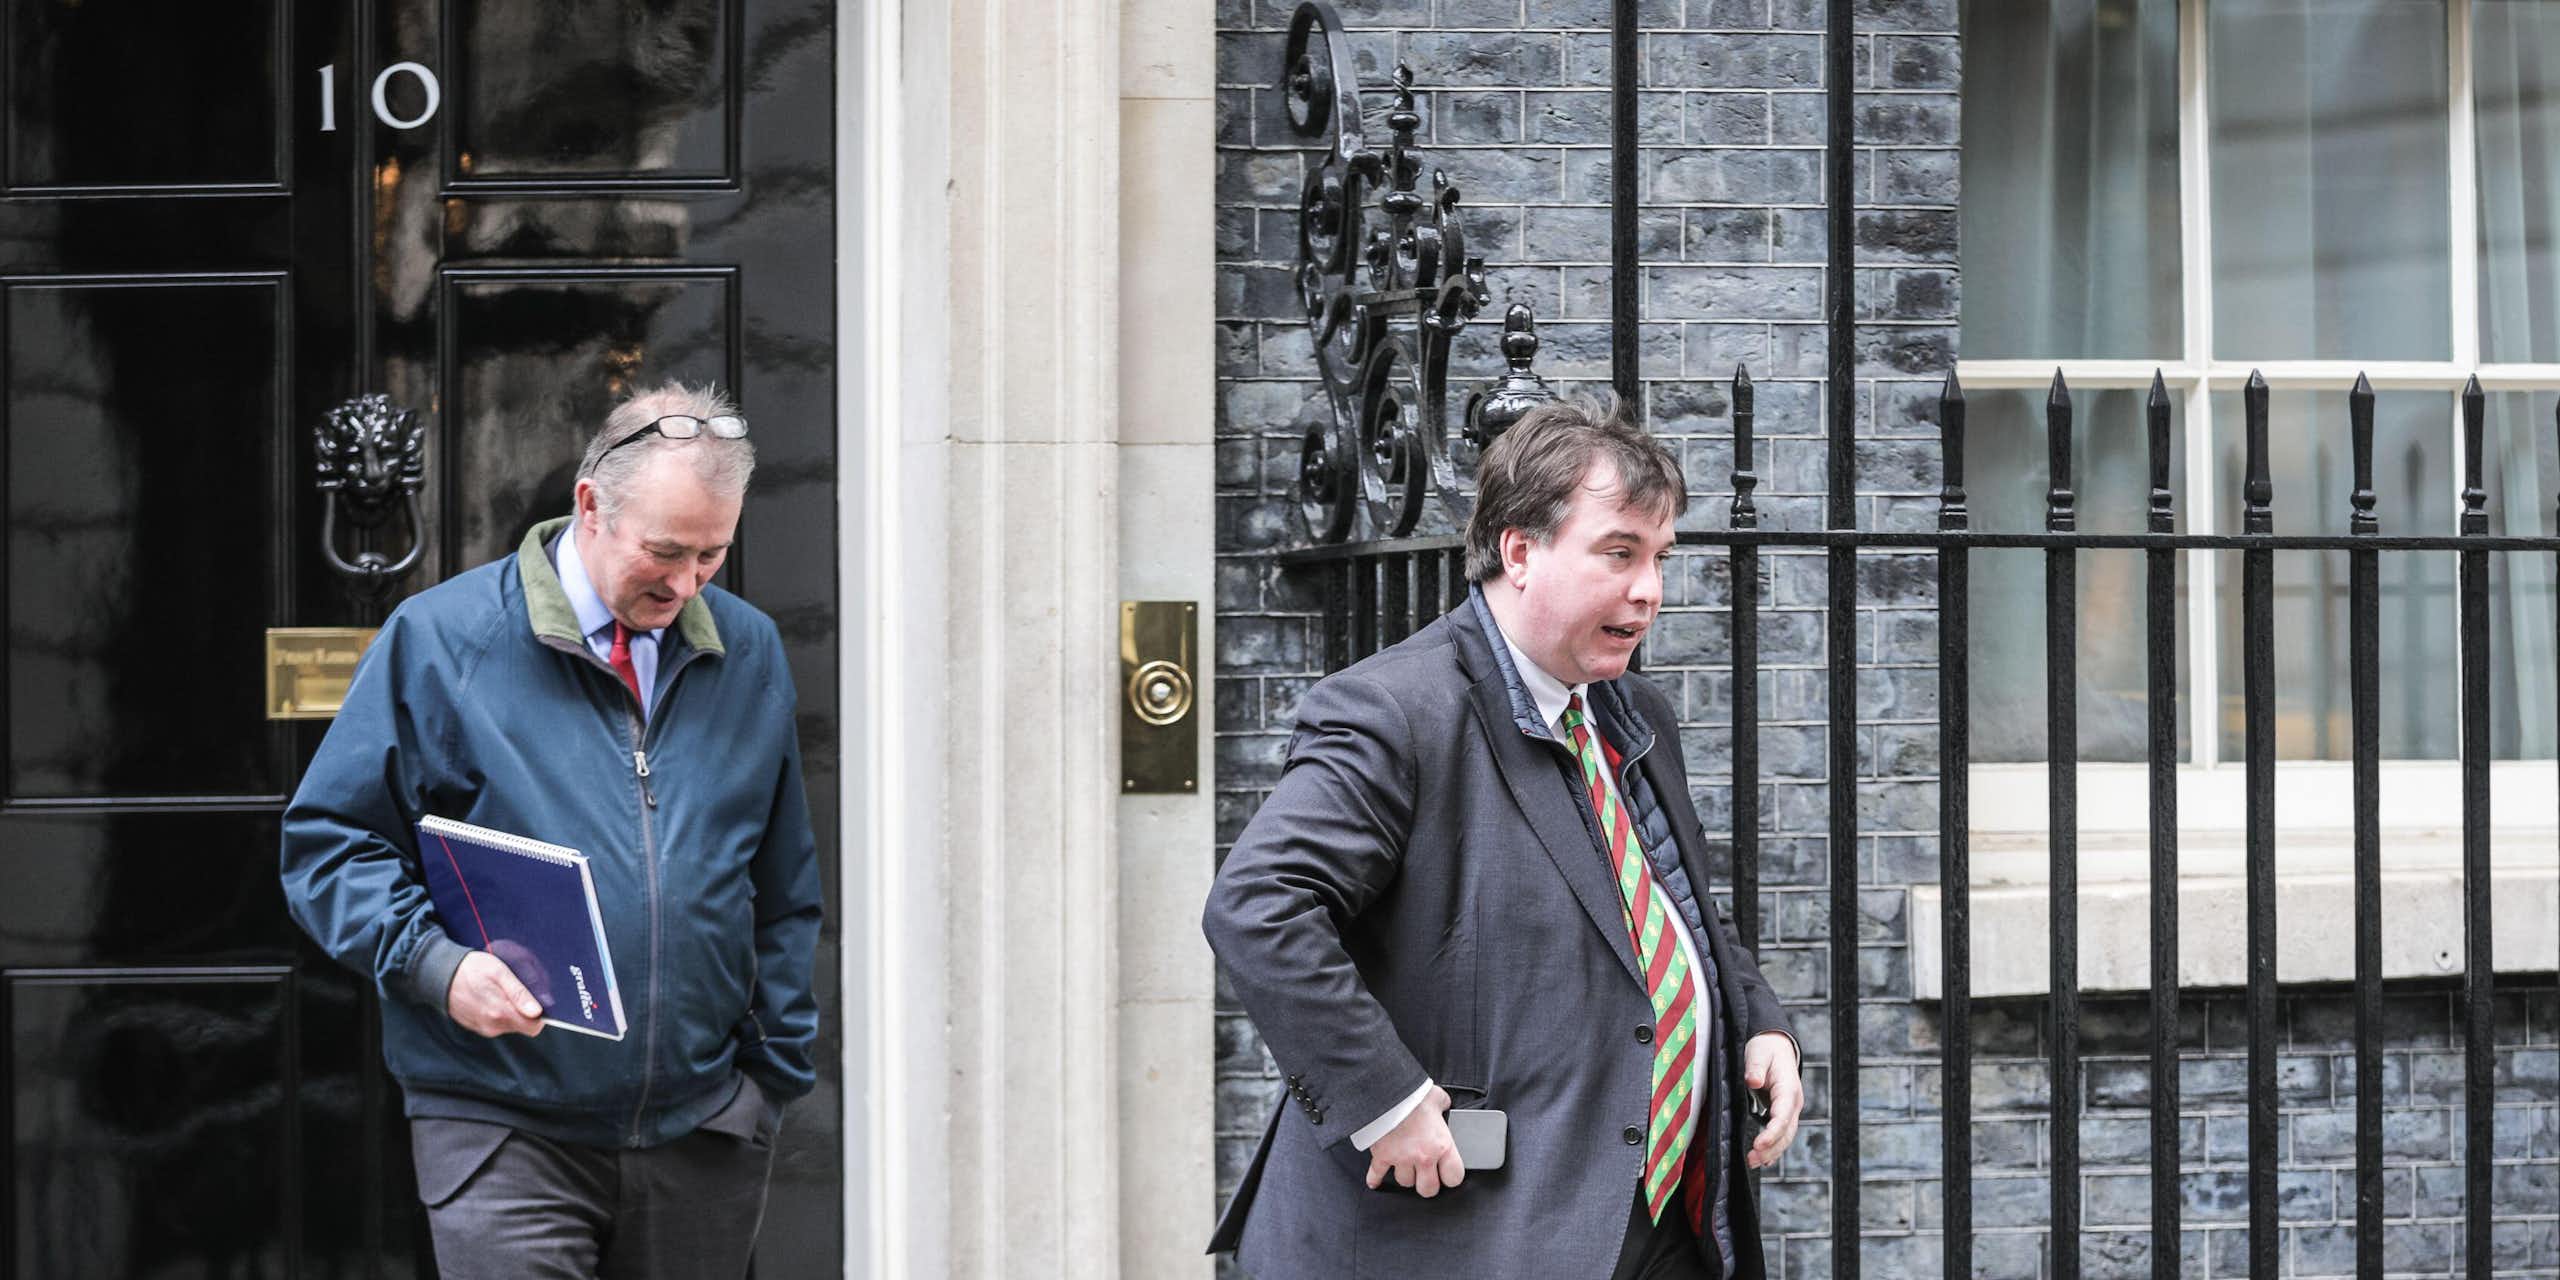 Craig Williams and another man walking out of 10 Downing Street. 